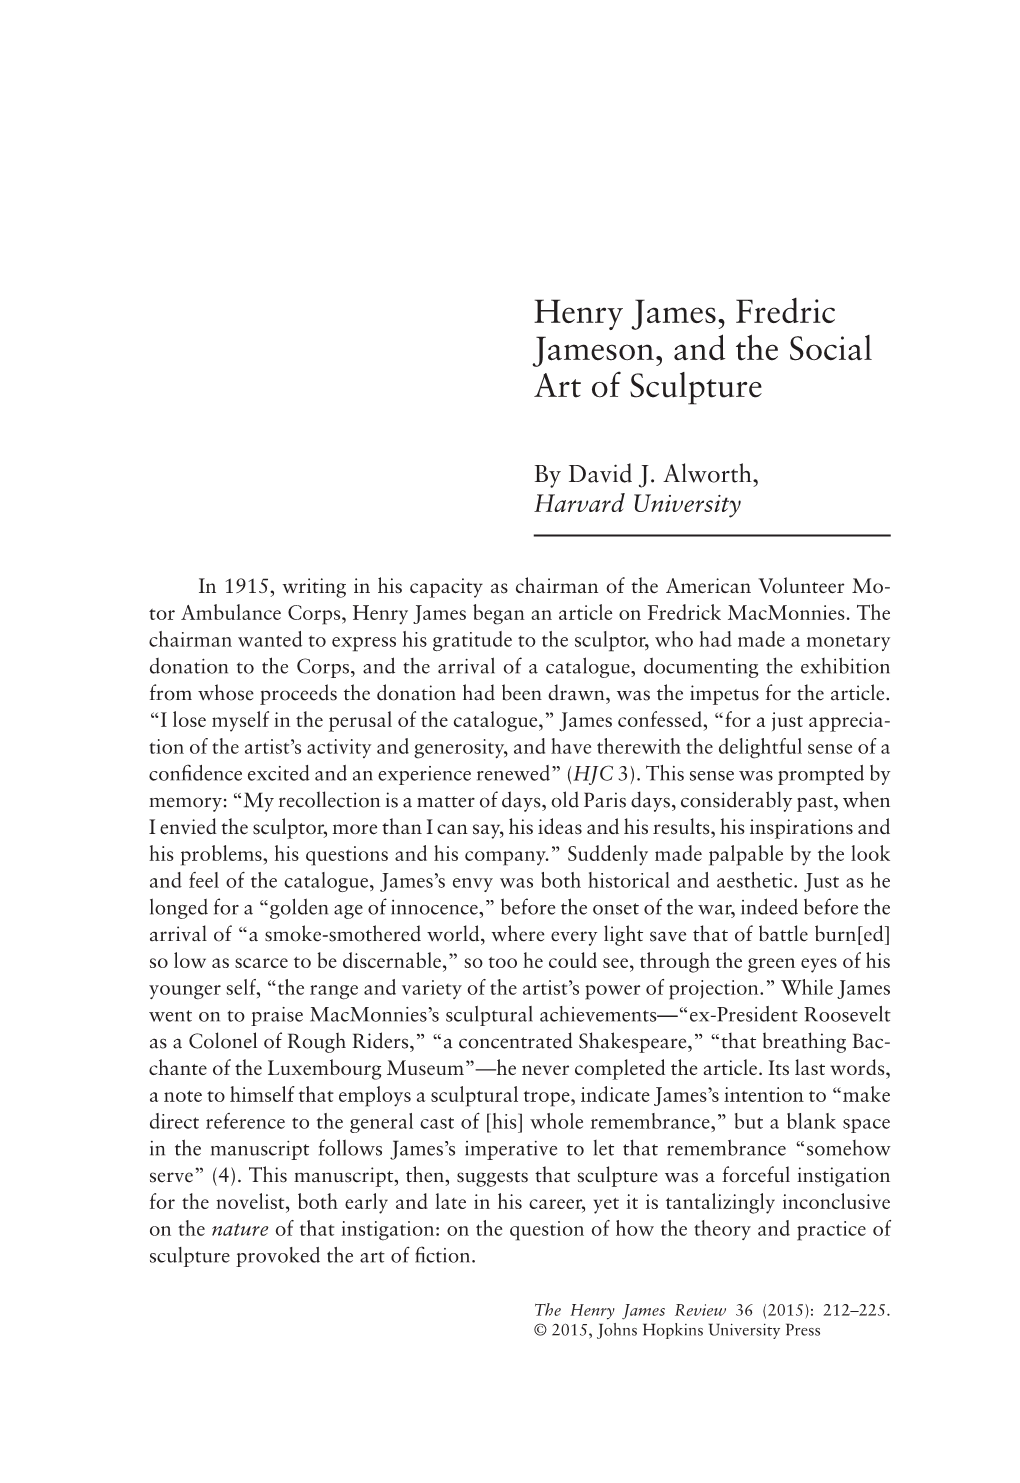 Henry James, Fredric Jameson, and the Social Art of Sculpture